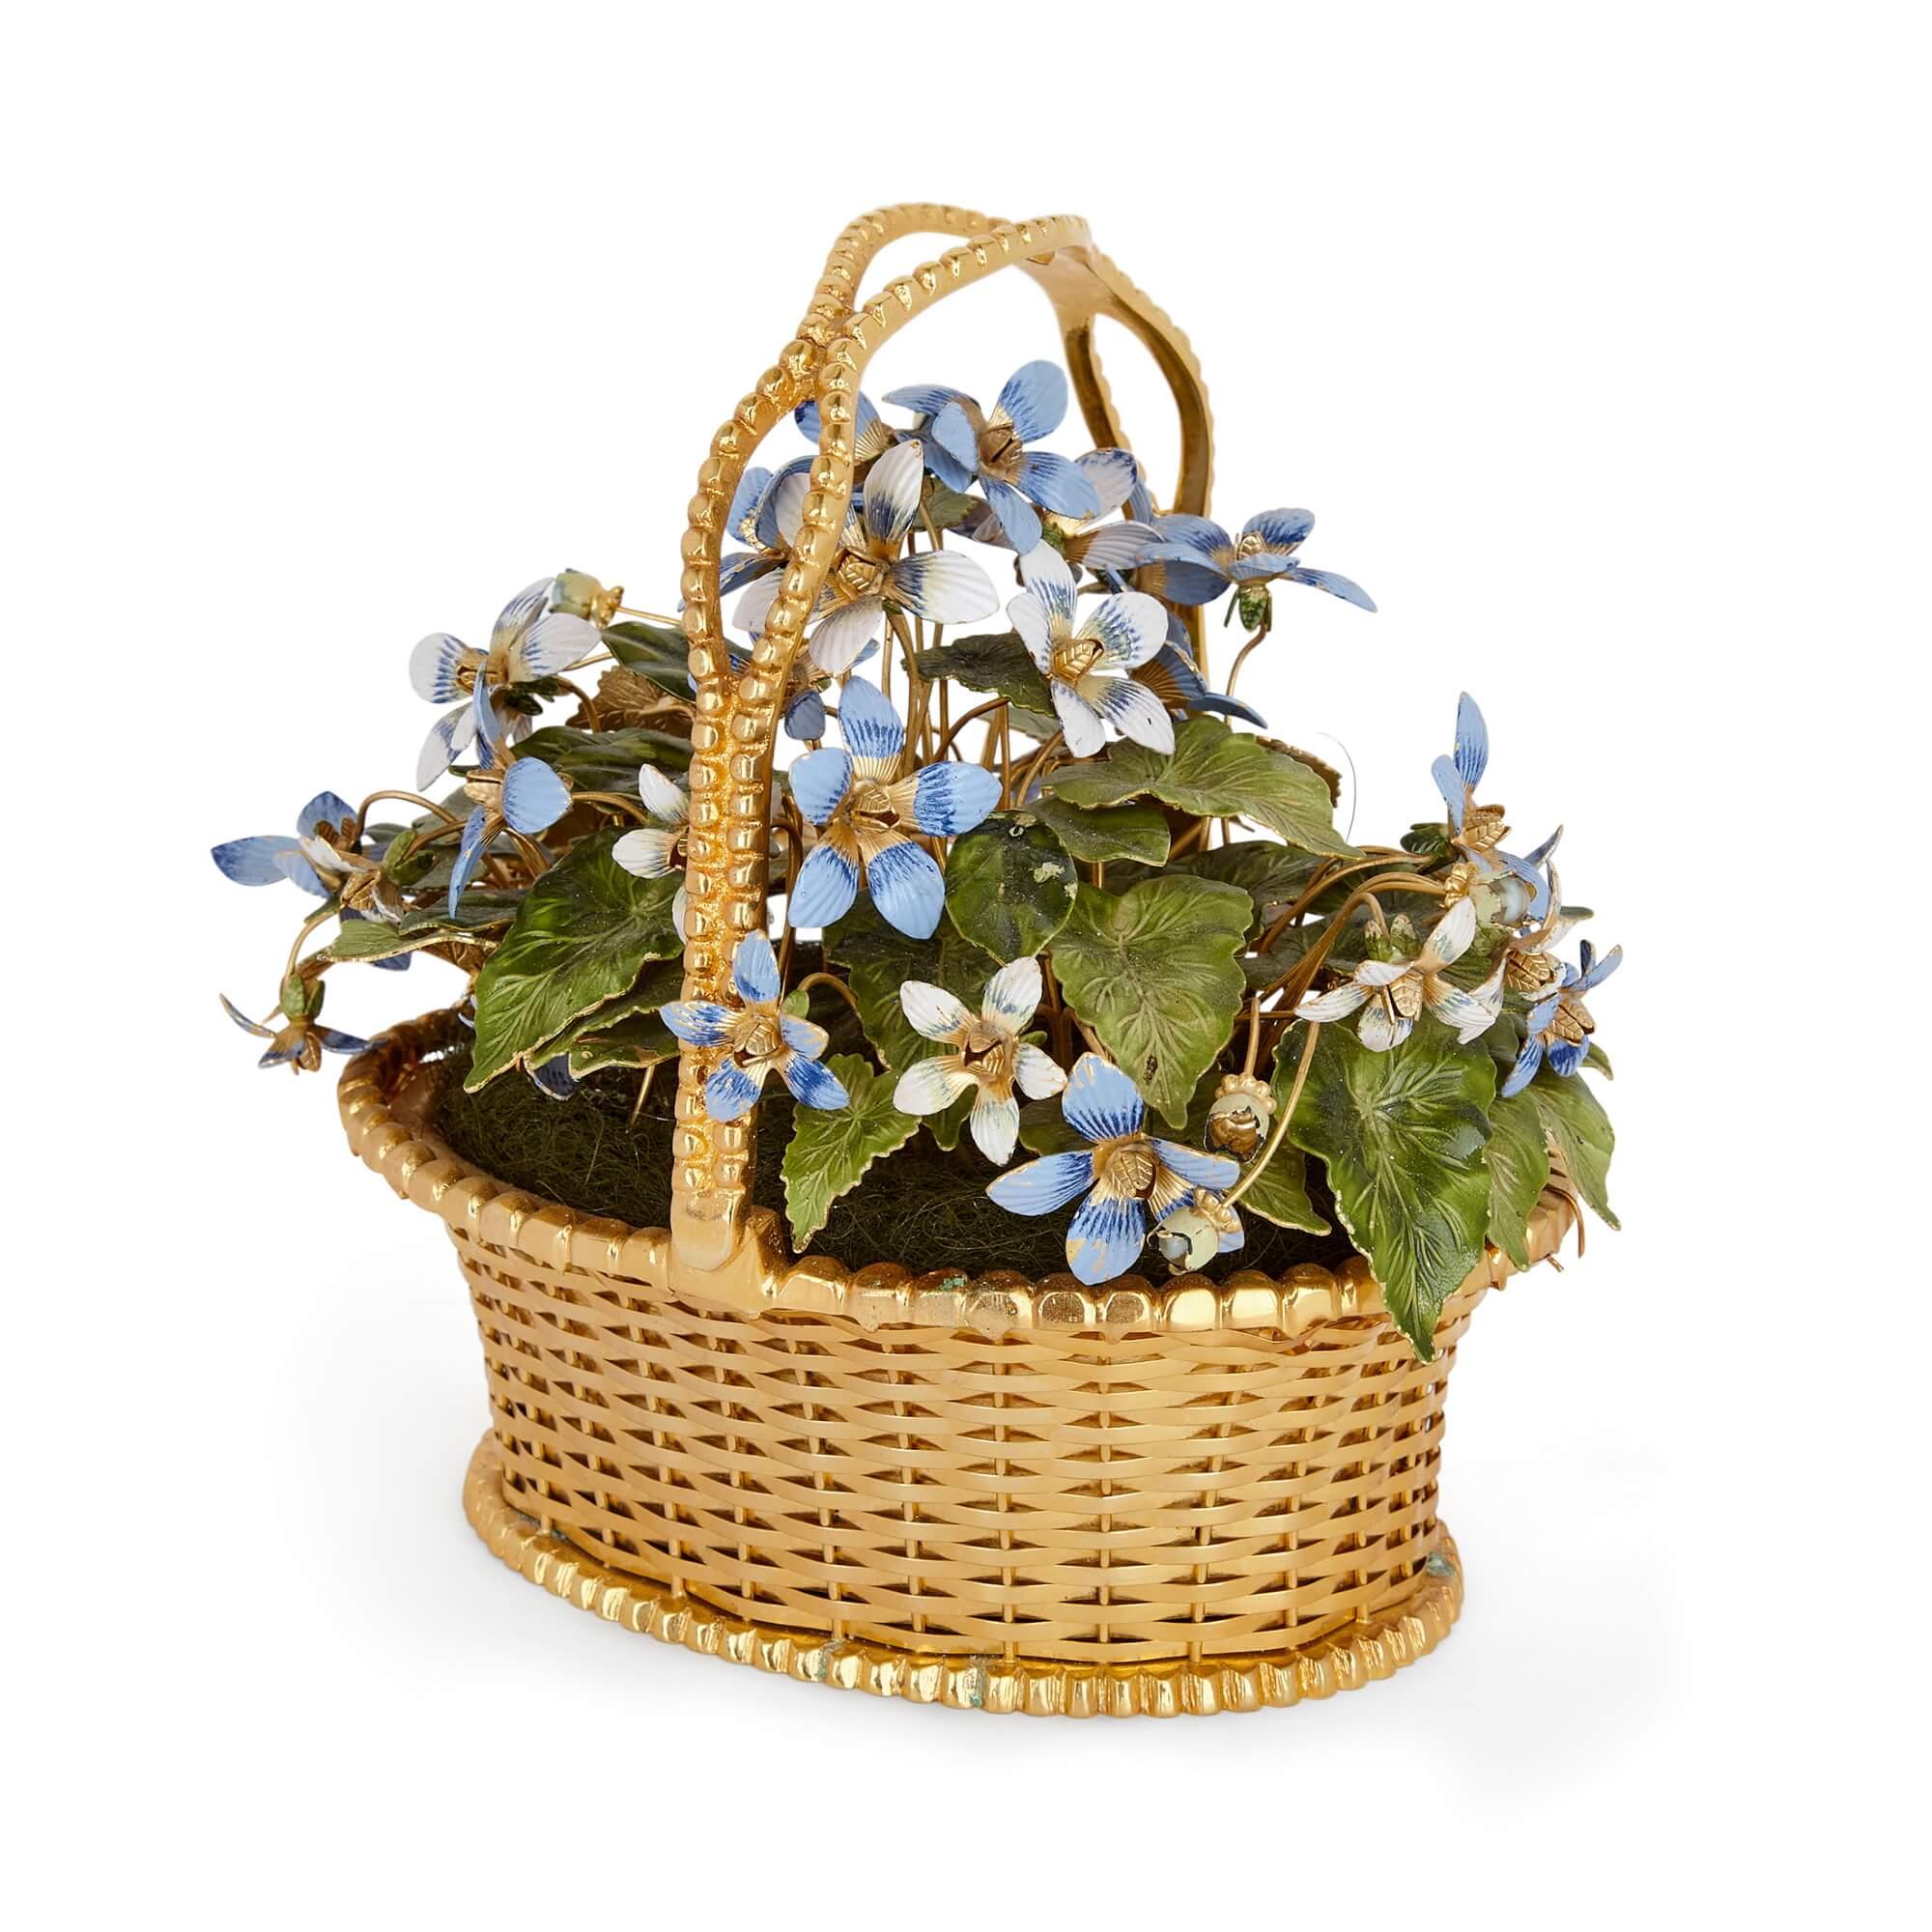 Pair of gilt-metal and enamel 'Fleurs des Siècles' flower baskets by Gorham
American, circa 1975
Measures: height 15cm, width 17cm, depth 13cm

Designed by Jane Hutcheson for the Gorham Manufacturing Company of Providence, Rhode Island, these